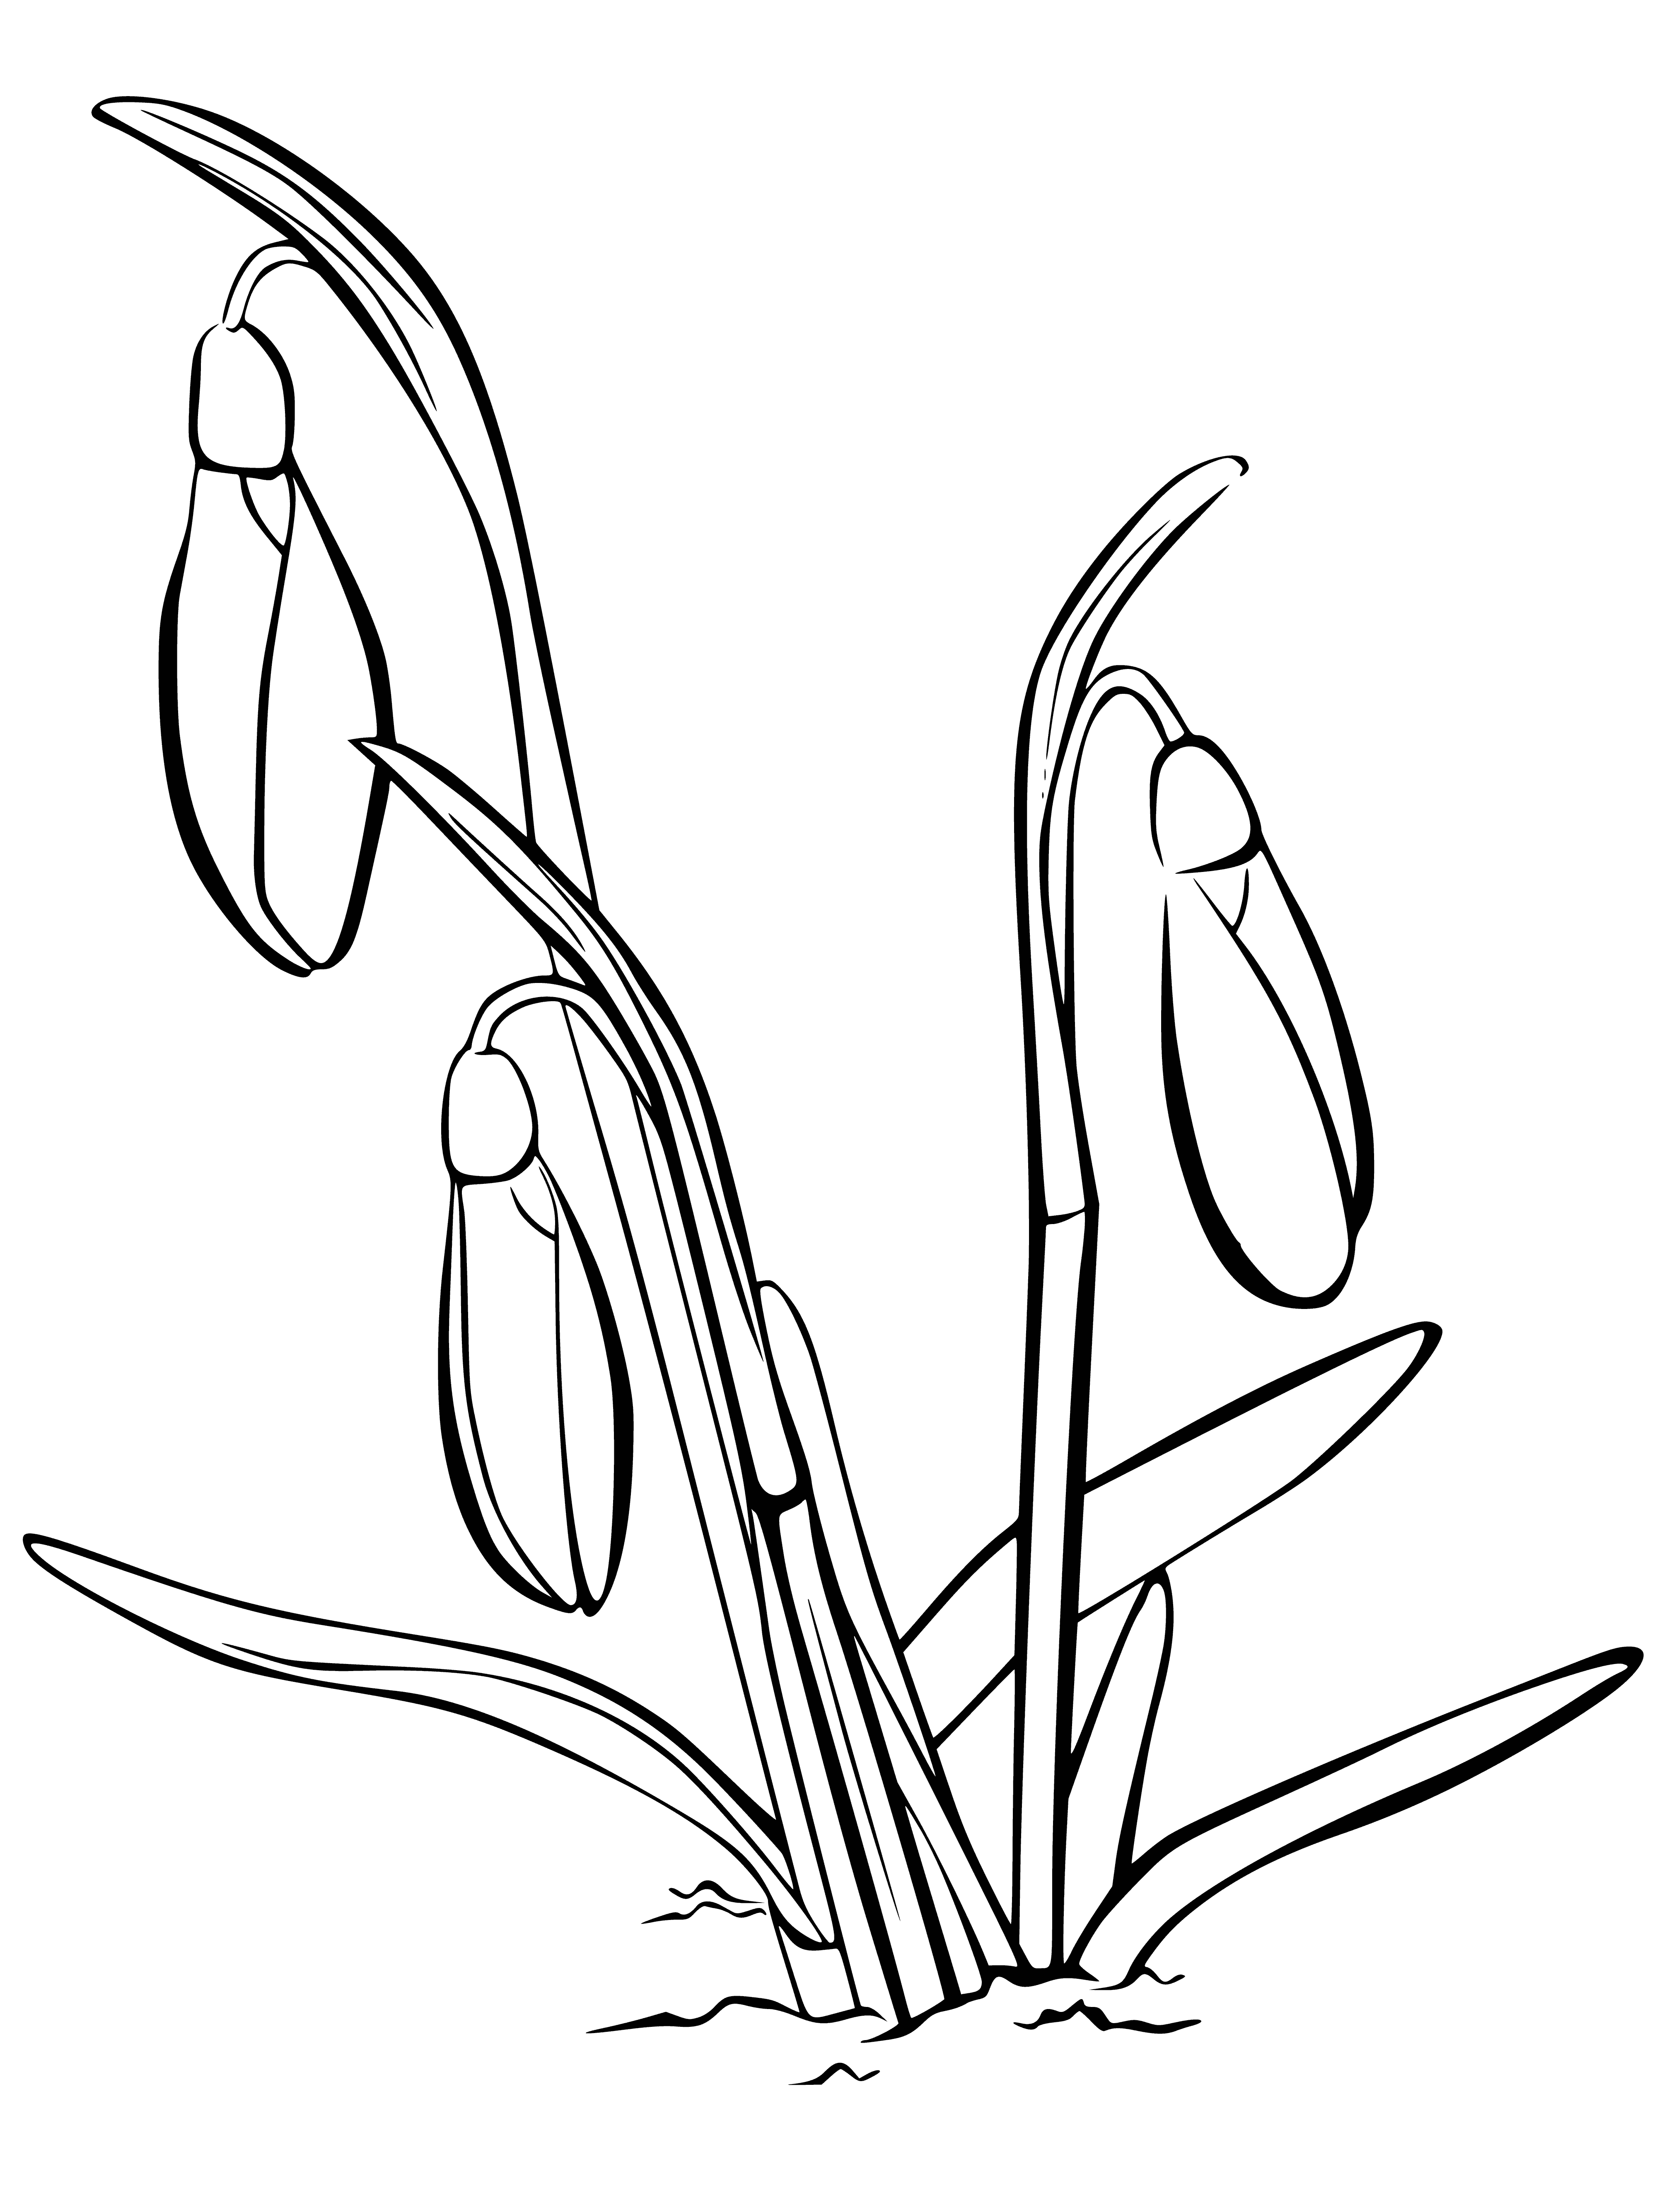 coloring page: Snowdrop is a small, white flower native to Europe/Asia blooming in early spring. It has 6 petals, outer larger than inner, w/ greenish-yellow stigma in center.